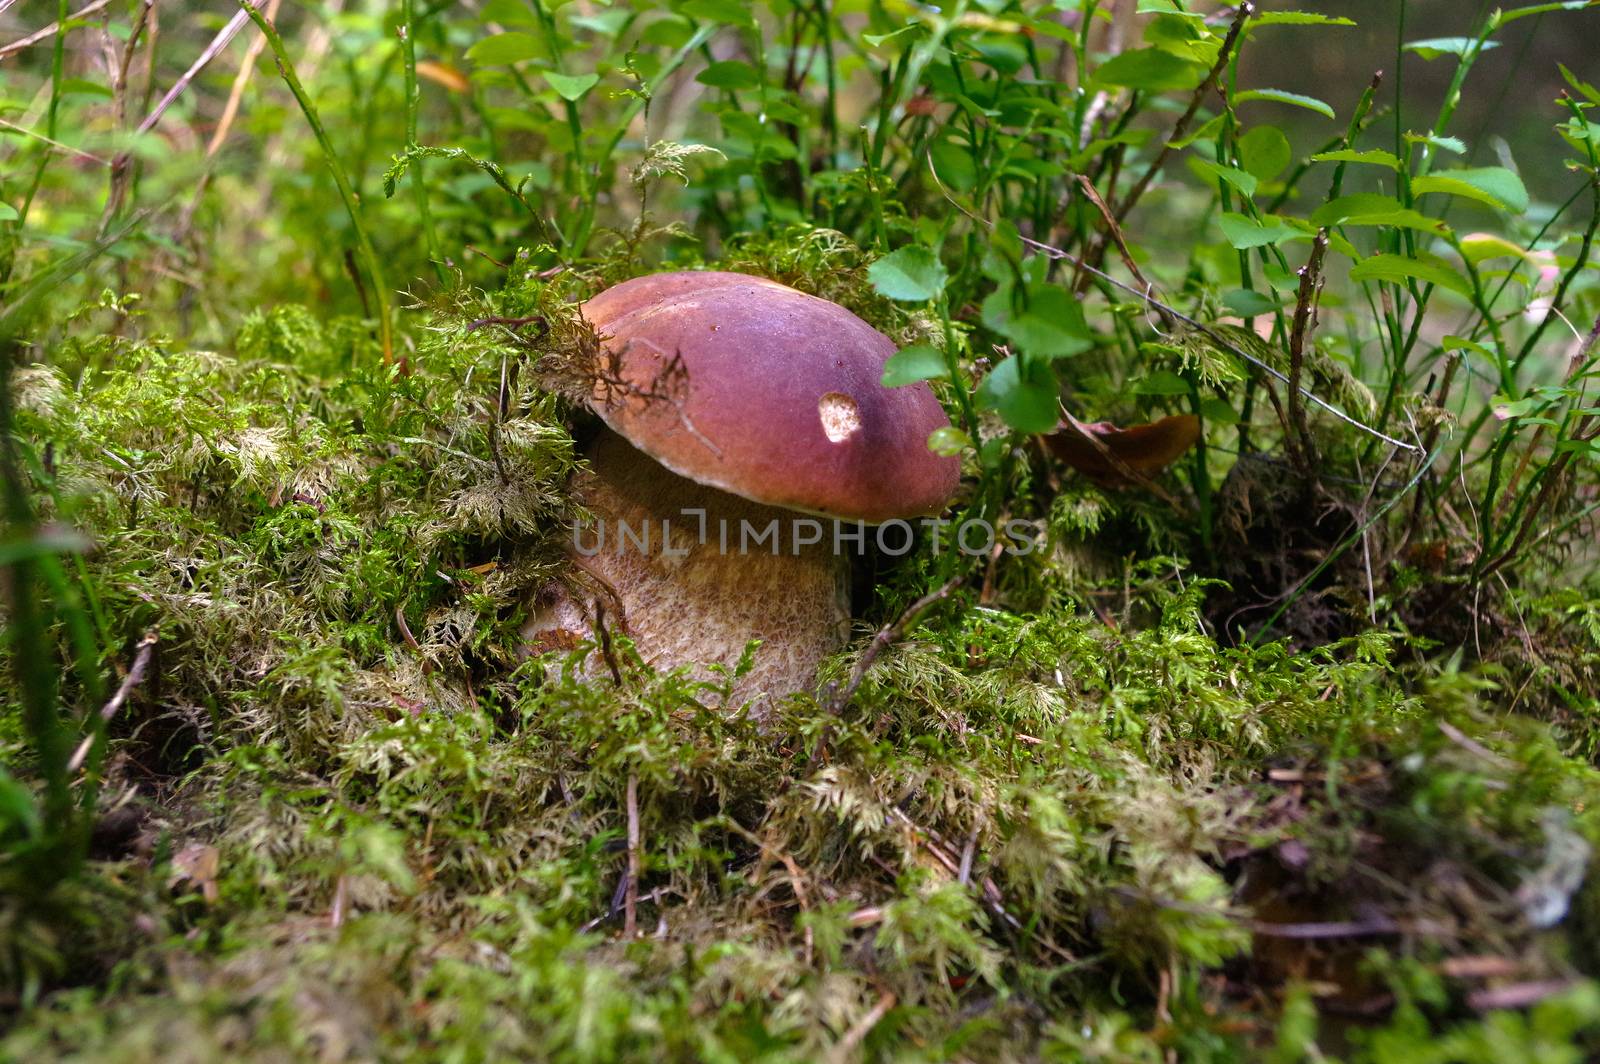 Boletus edulis or cep, penny bun, porcino, or king bolete. Mushroom porcino or cep in it's natural habitat. Edible mushroom boletus edulis. Mushrooms in the autumn forest